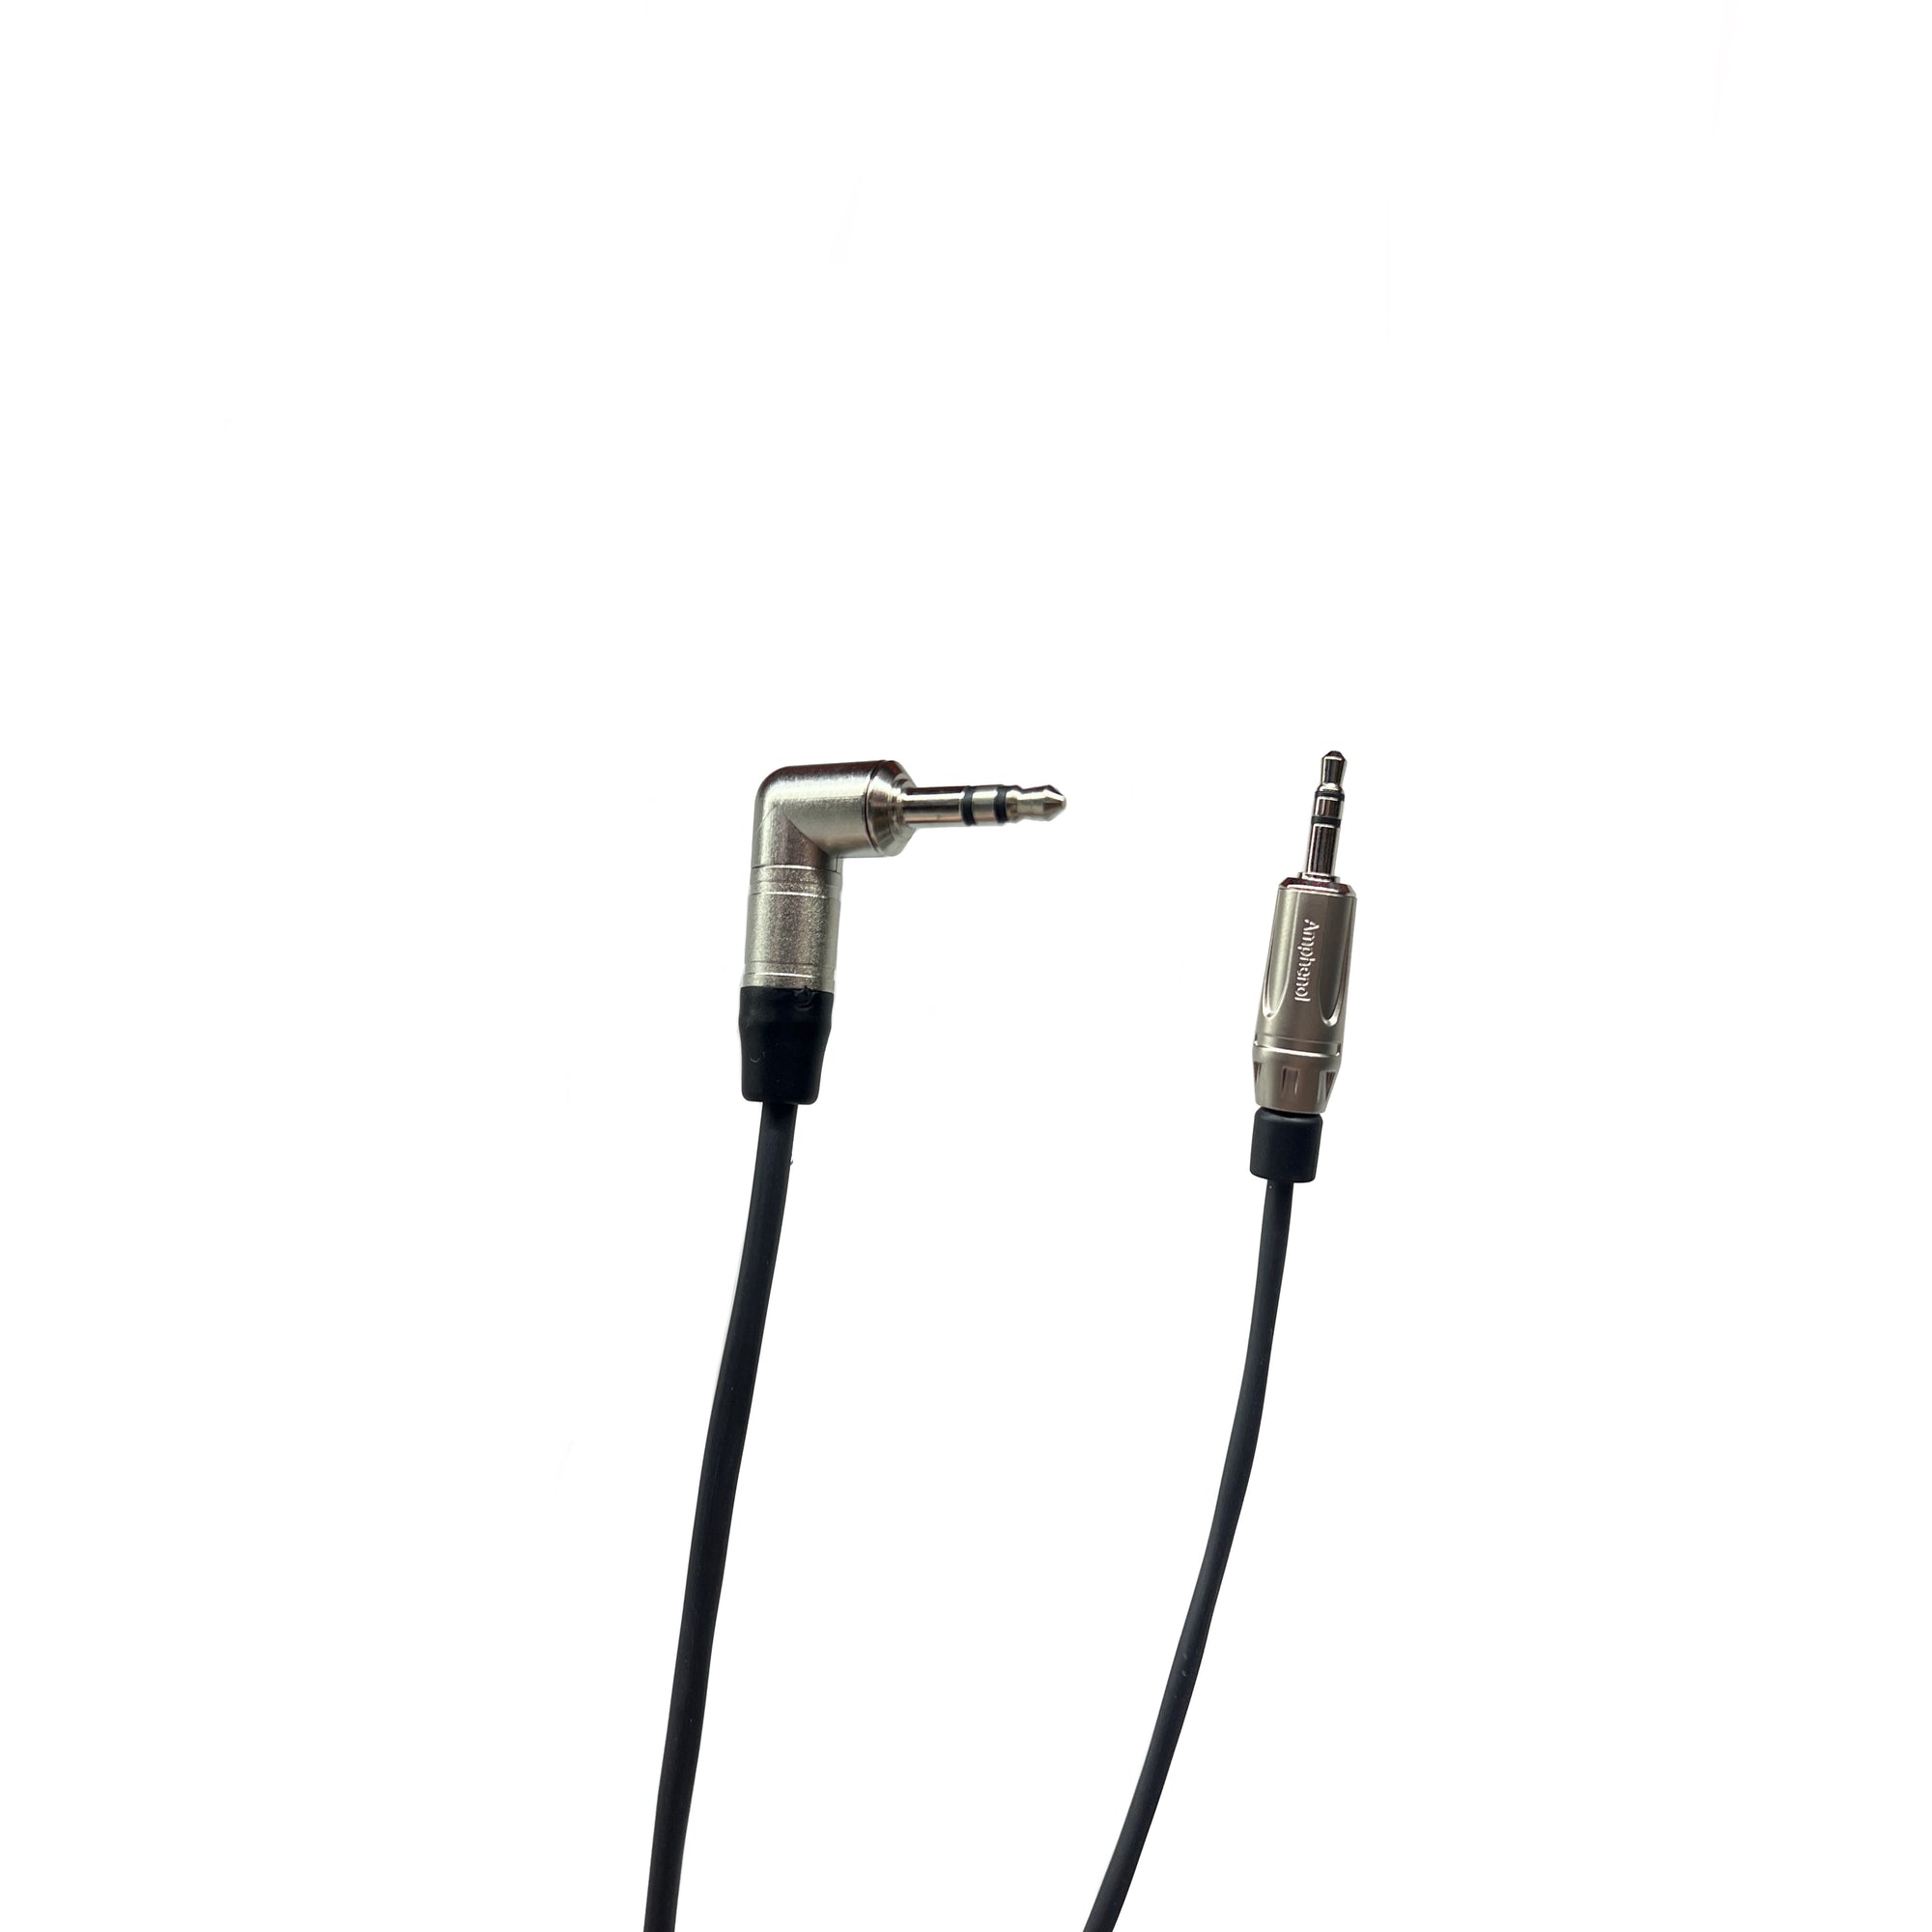 Plenum 3.5mm Right Angle to 3.5mm Straight Stereo Audio Cable Male to Male - Installation Grade